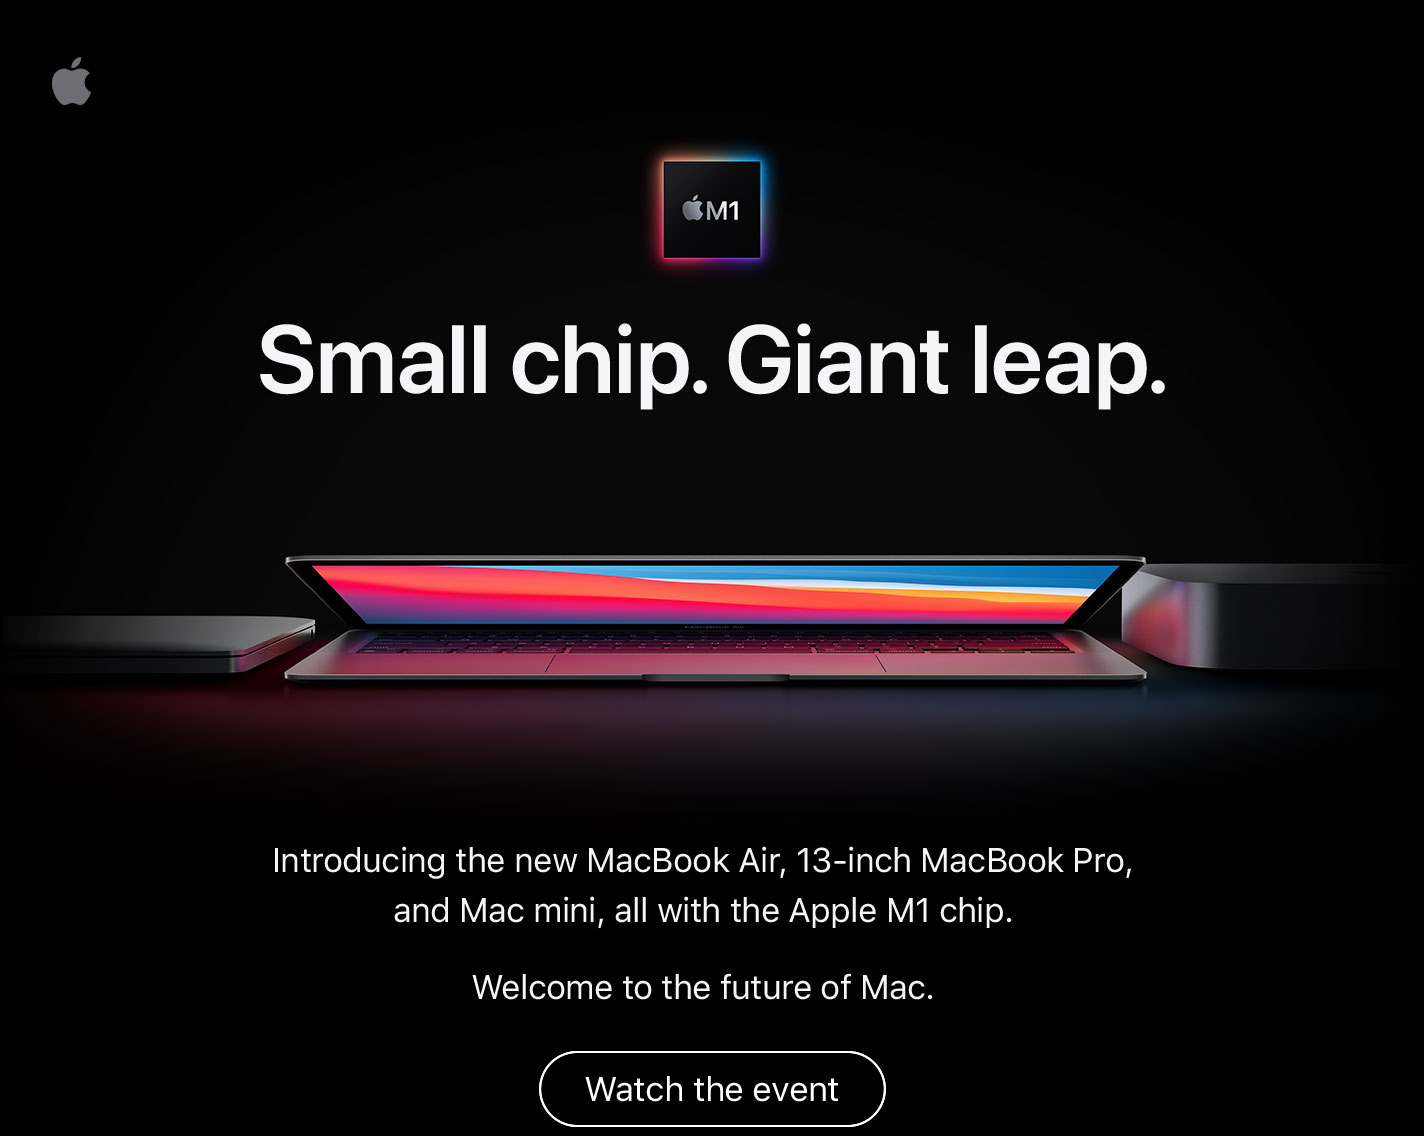 Small chip. Giant leap. Introducing the new MacBook Air, 13-inch MacBook Pro, and Mac mini, all with the Apple M1 chip. Welcome to the future of Mac. Watch the event